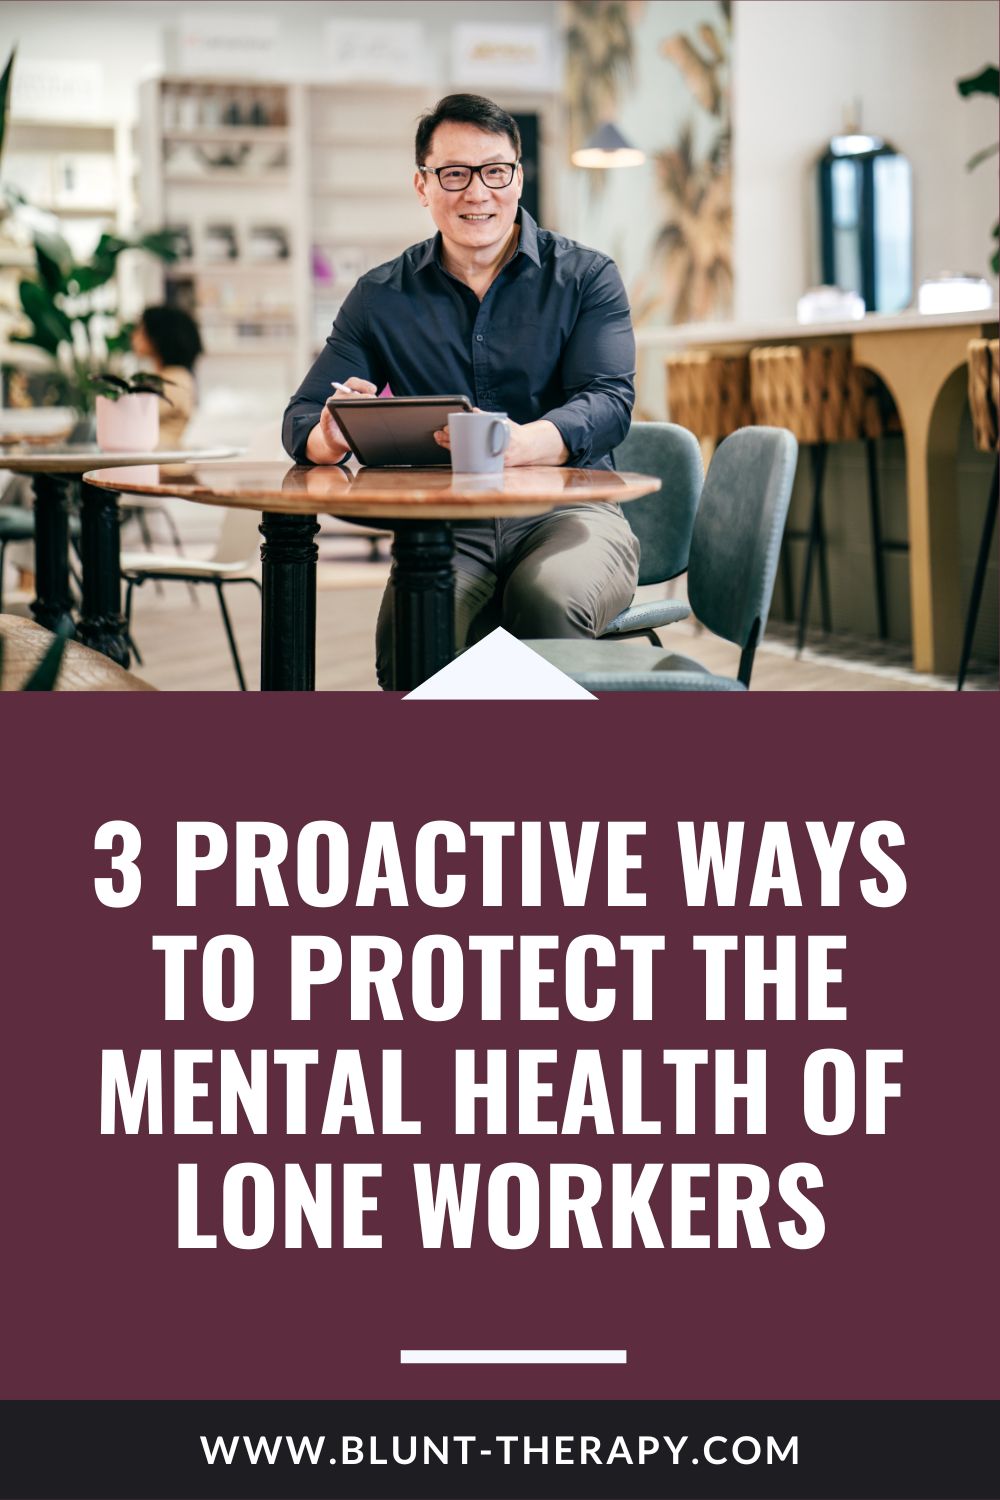 3 Proactive Ways To Protect the Mental Health of Lone Workers